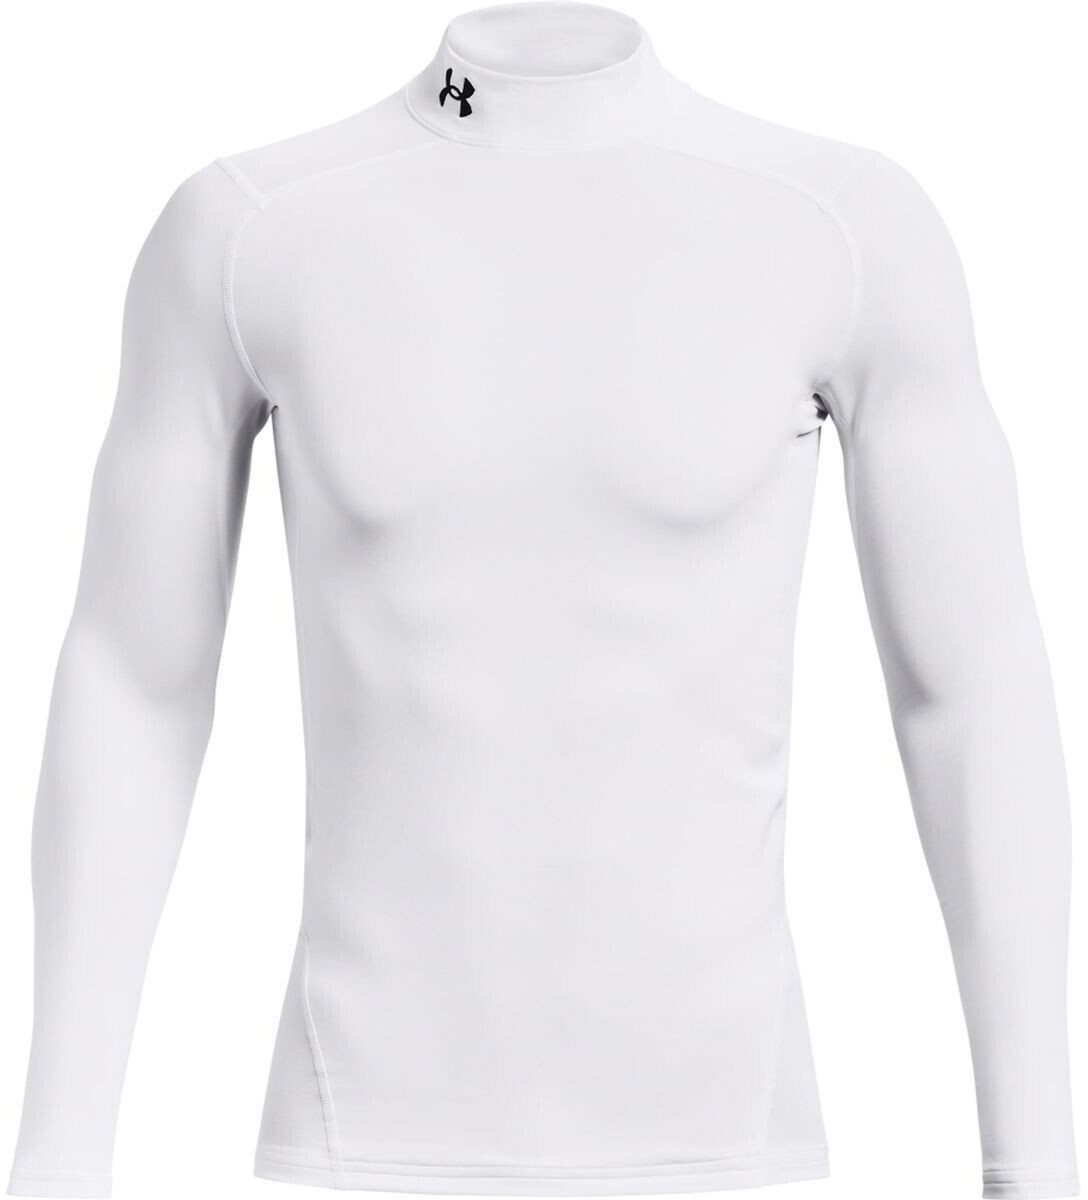 Buy Under Armour ColdGear Armour Compression Mock (1366072) from £26.00  (Today) – Best Deals on